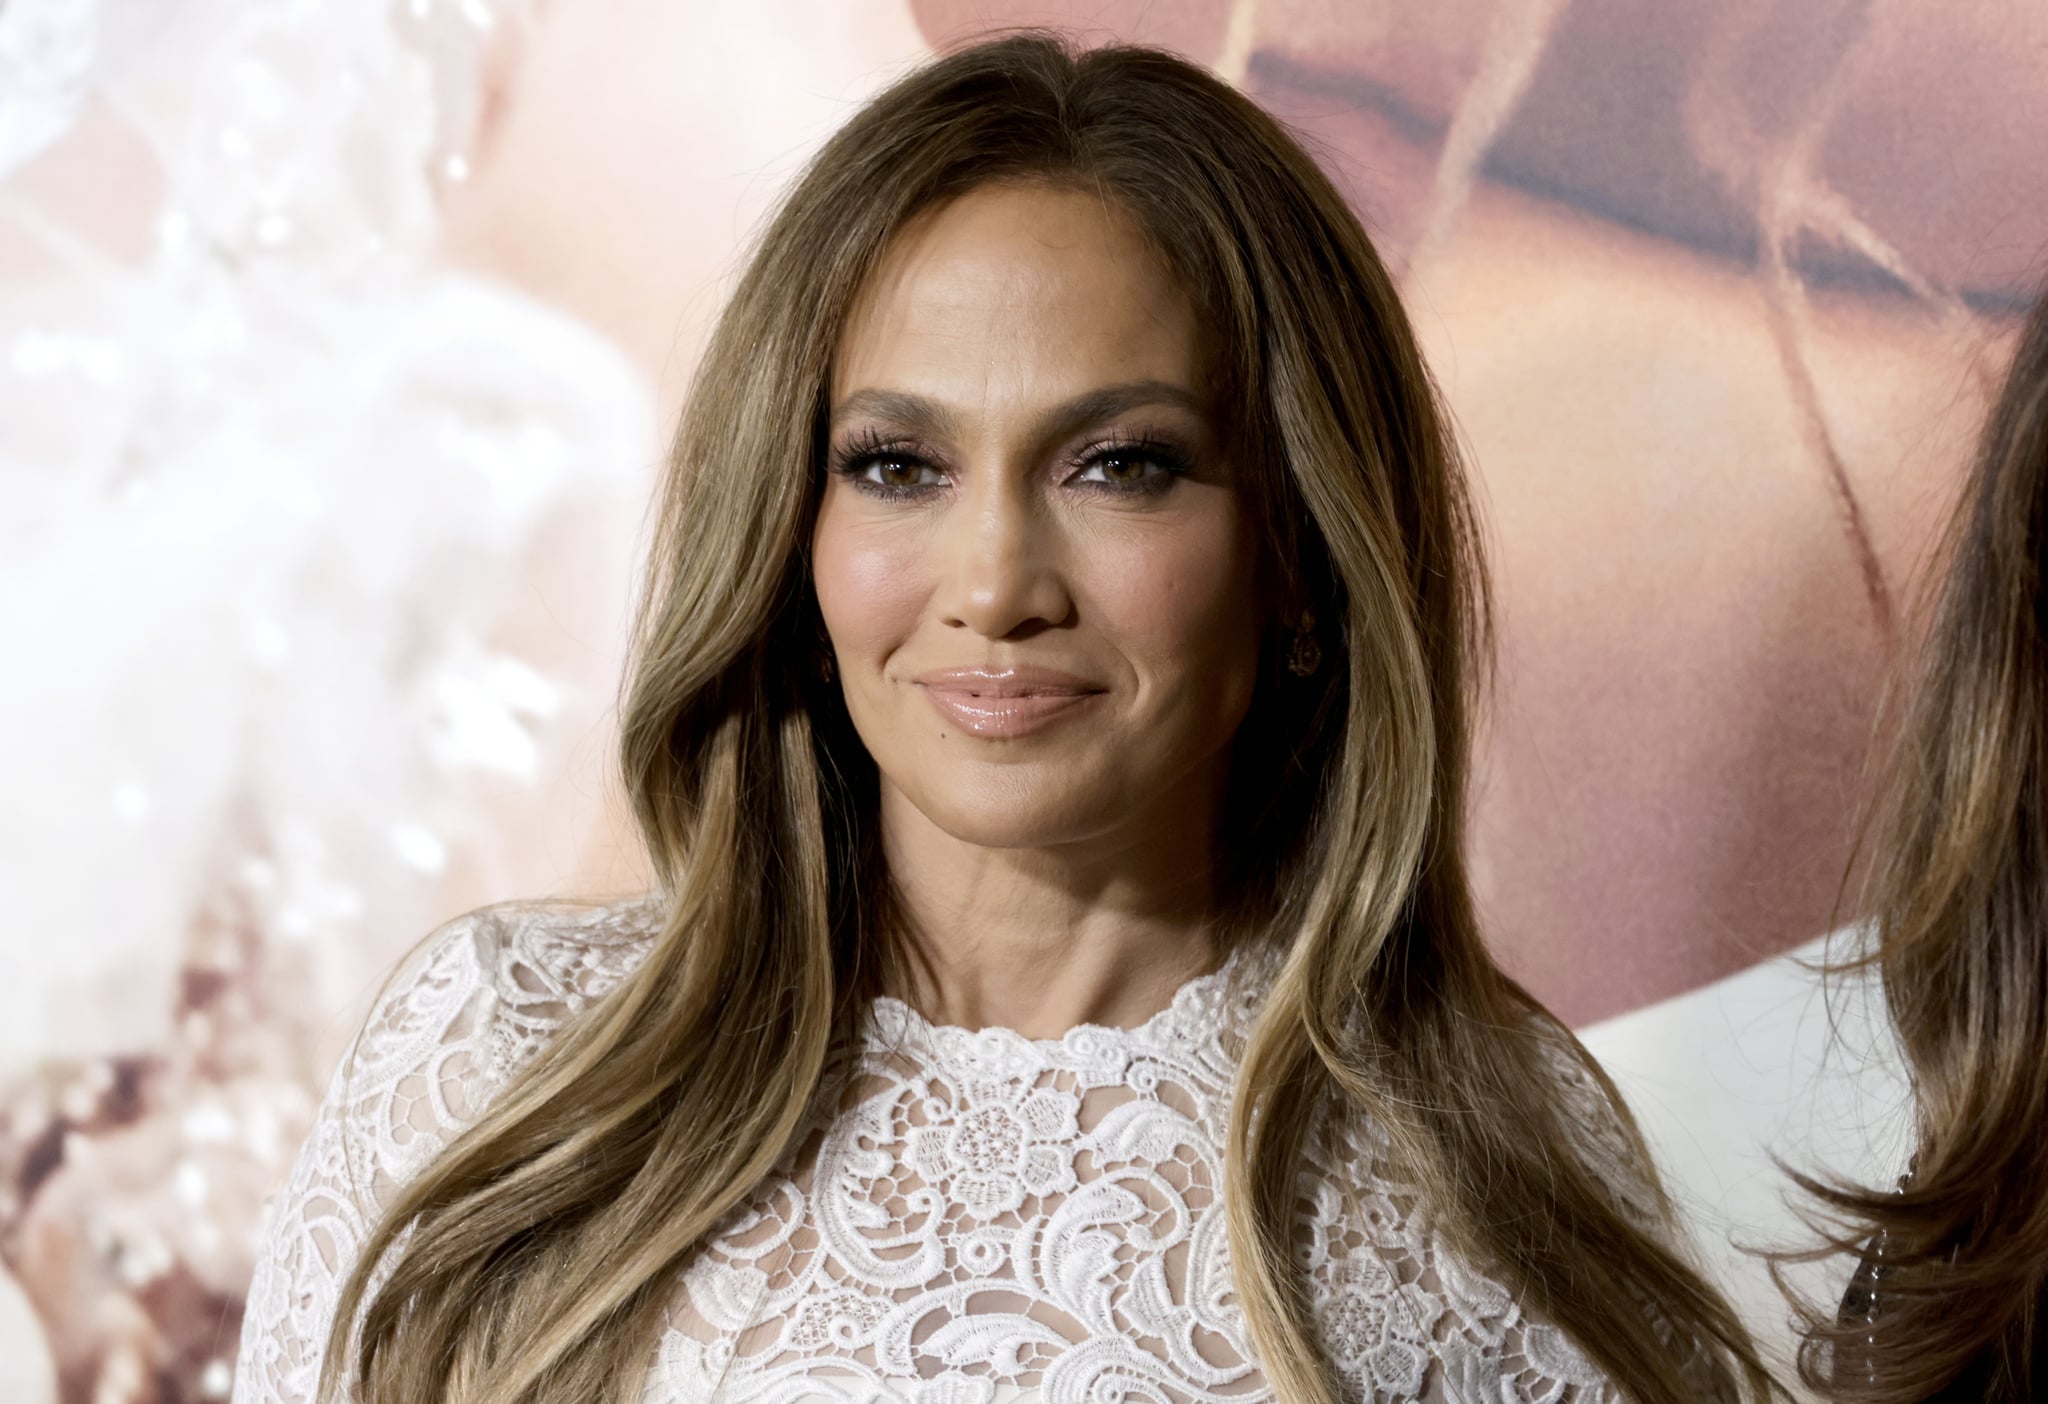 LOS ANGELES, CALIFORNIA - FEBRUARY 08: Jennifer Lopez attends the Los Angeles Special Screening of 